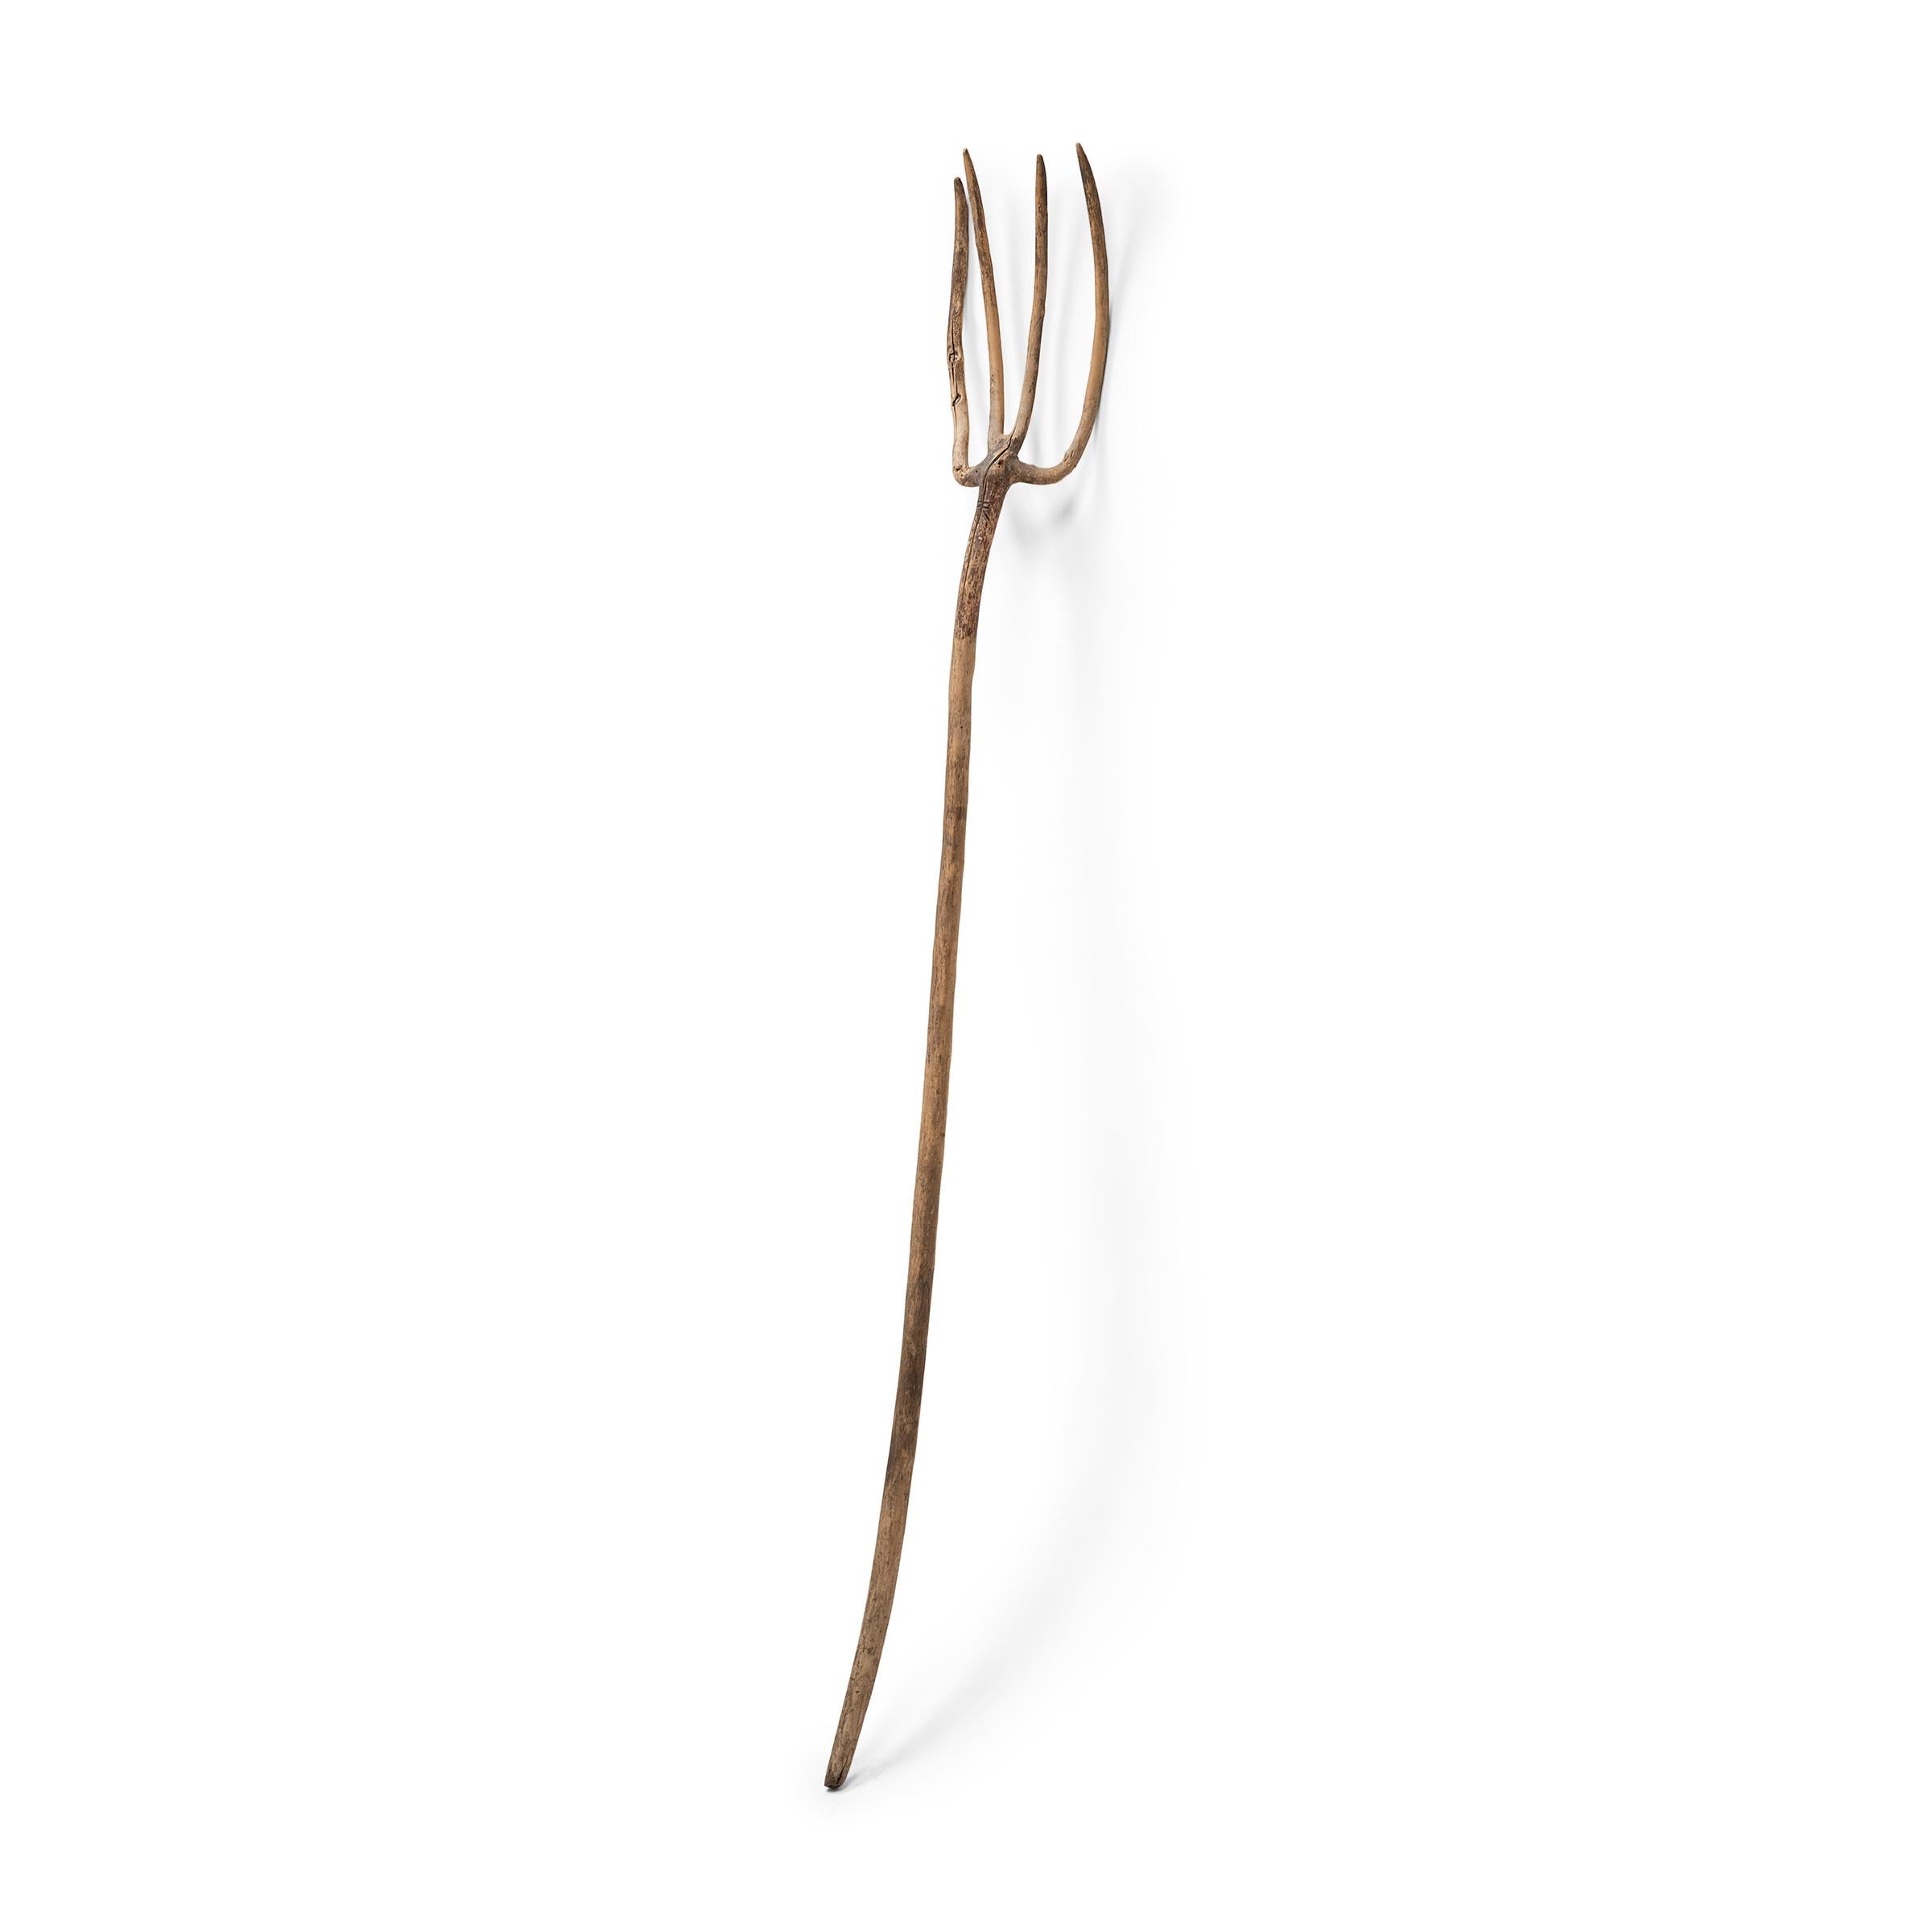 Organic Modern Chinese Provincial Bentwood Pitchfork, c. 1850 For Sale